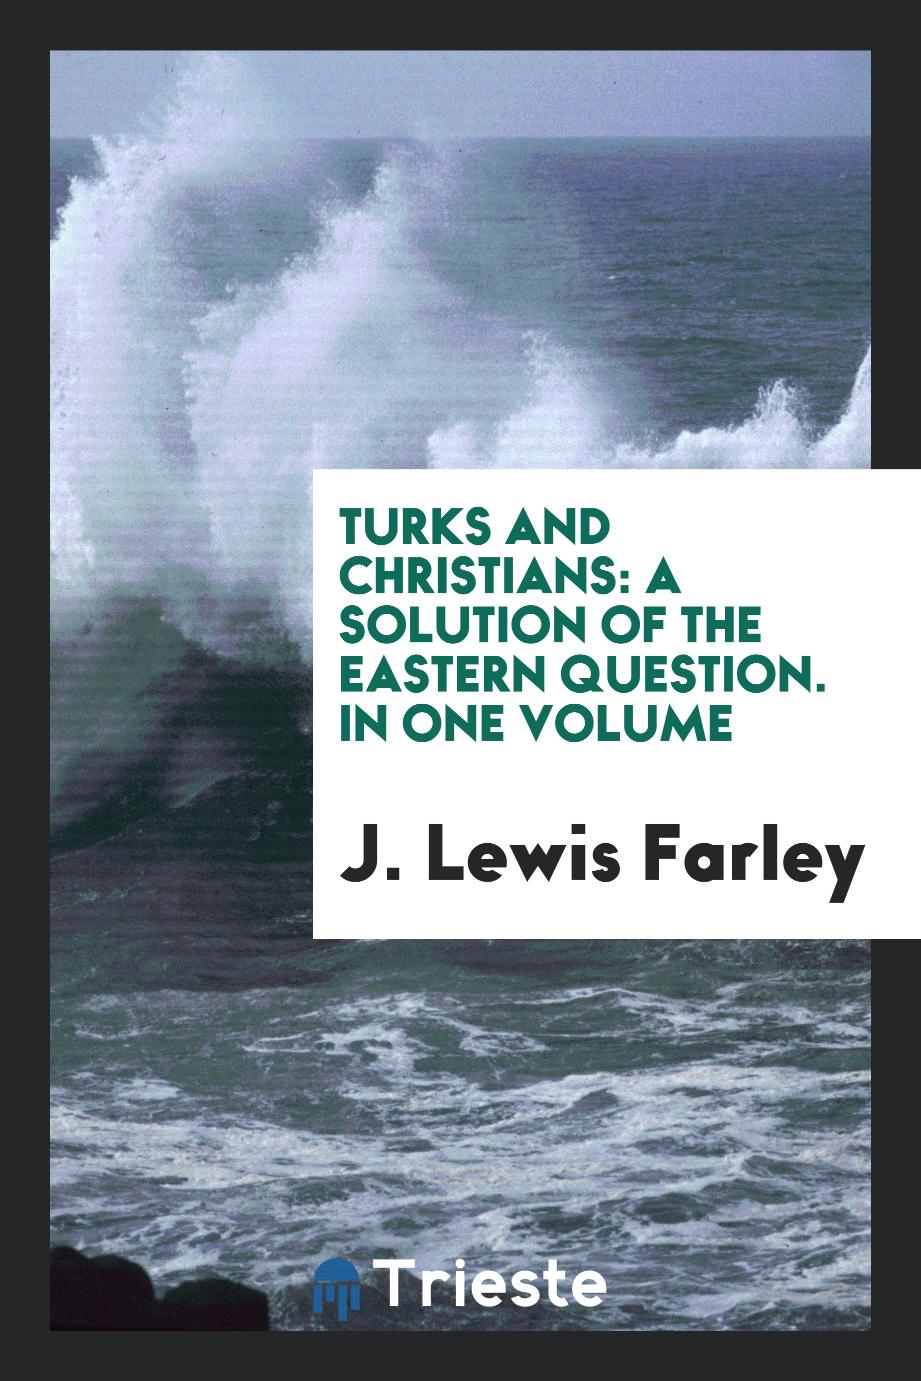 Turks and Christians: A Solution of the Eastern Question. In One Volume